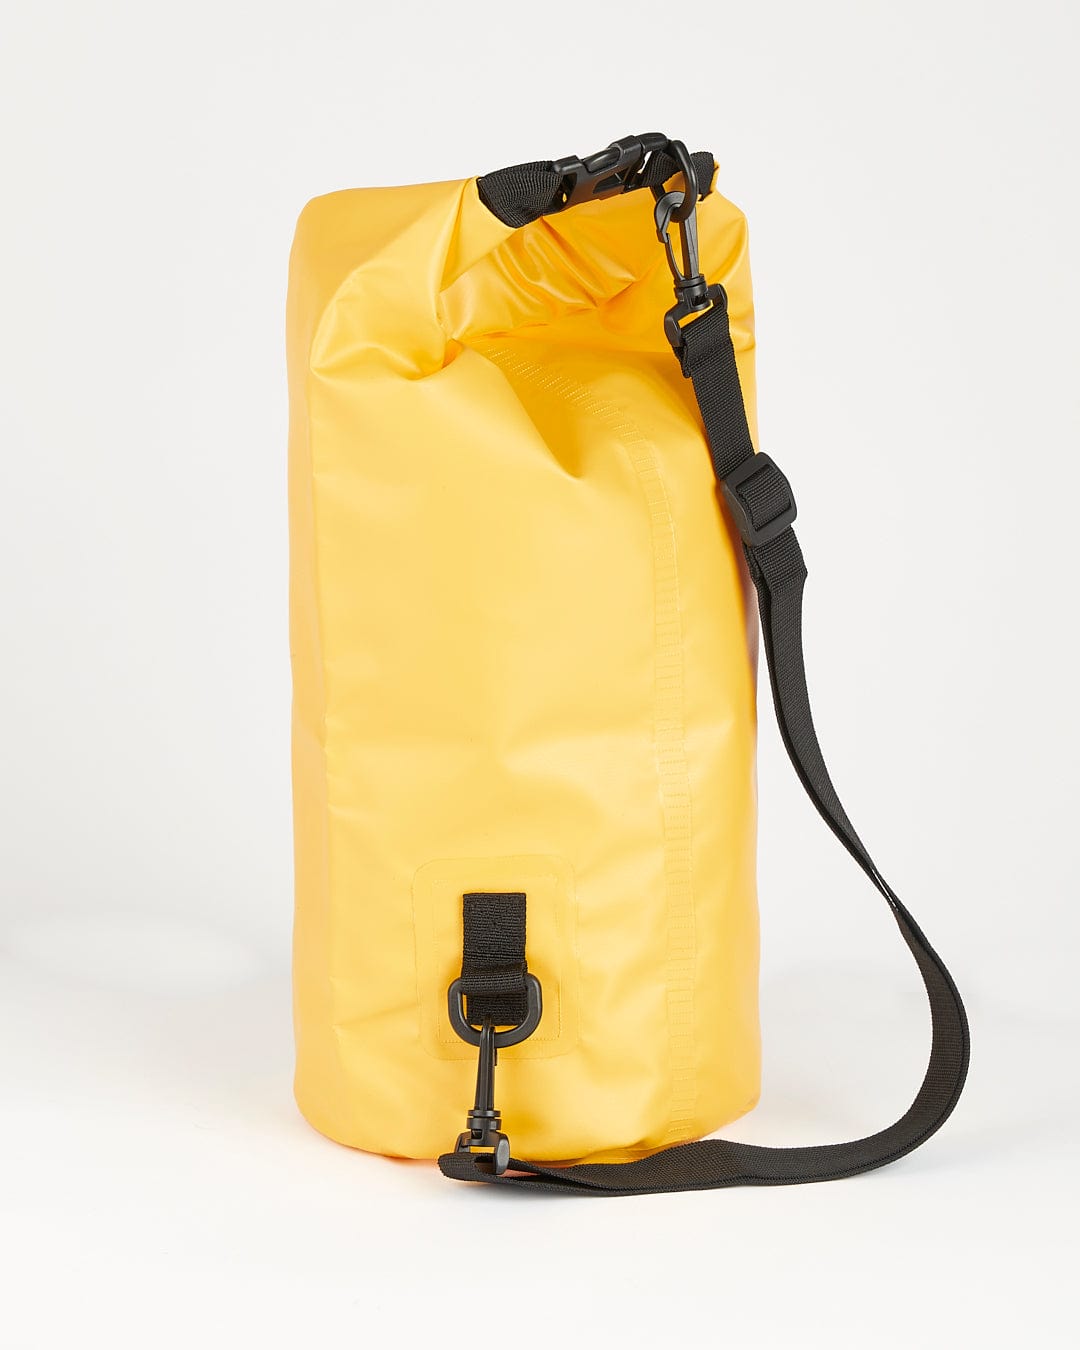 A Saltrock Wave - 10L Drybag - Yellow on a white background.